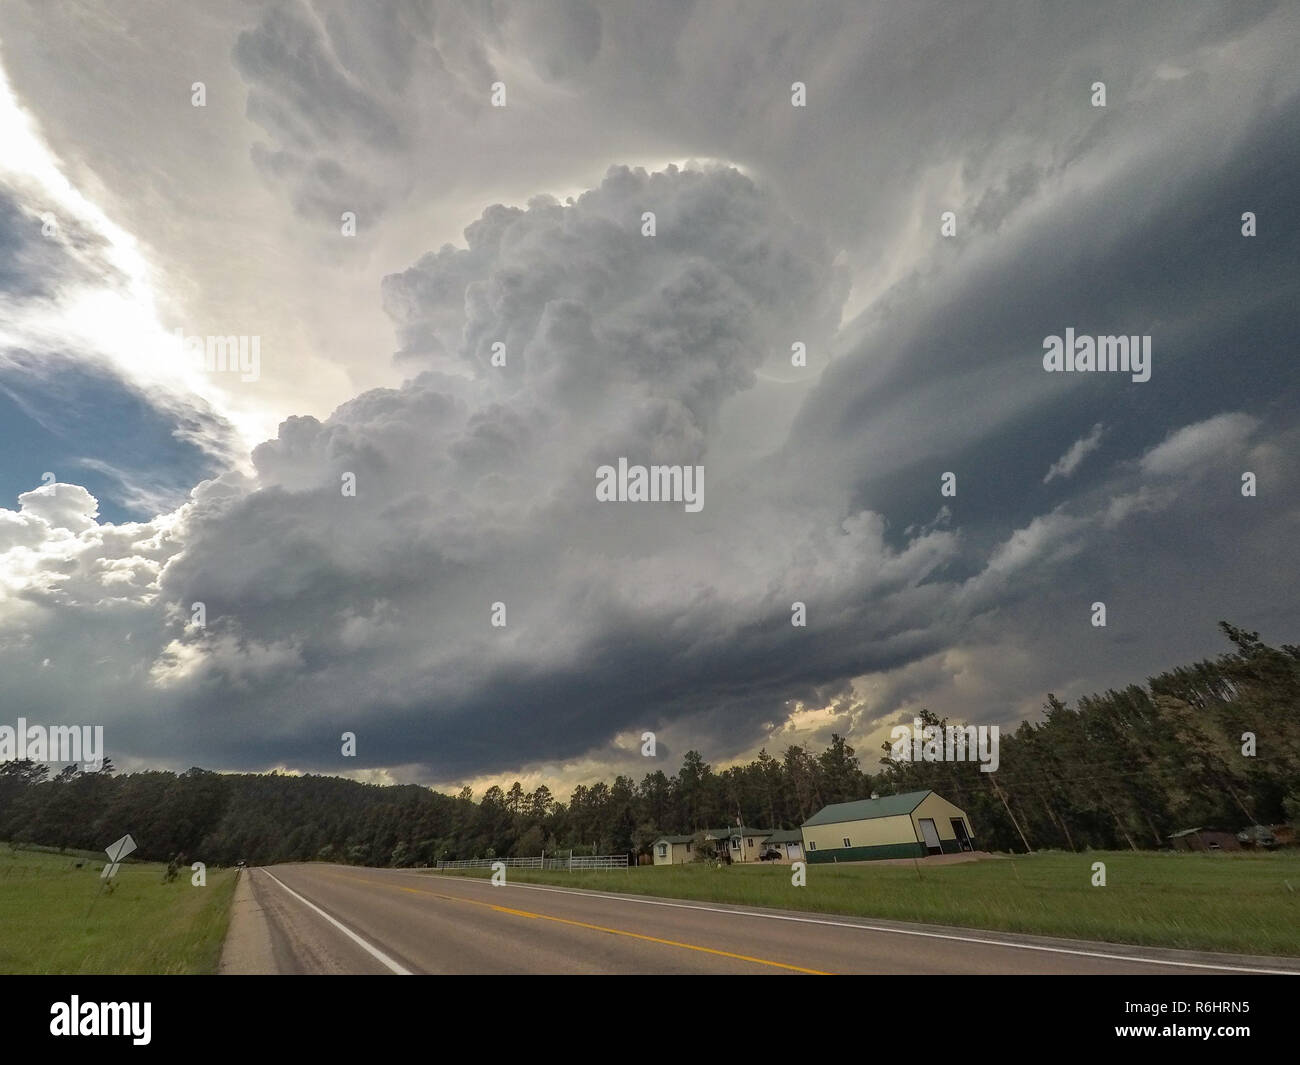 Severe rotating thunderstorm over the Black Hills in South Dakota. This supercell storm dropped very large hail, up to three inches in diameter. Stock Photo